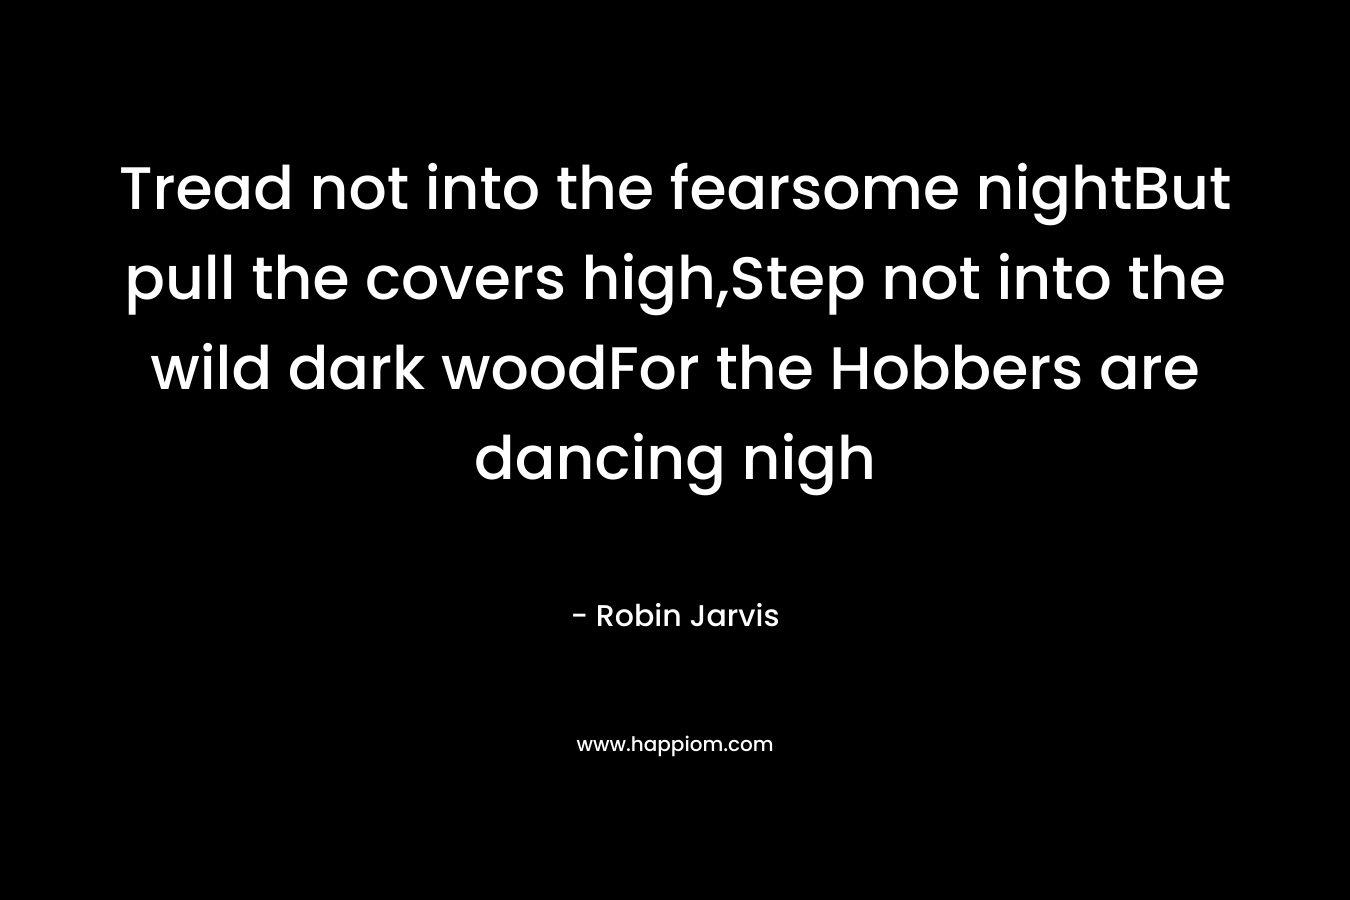 Tread not into the fearsome nightBut pull the covers high,Step not into the wild dark woodFor the Hobbers are dancing nigh – Robin Jarvis